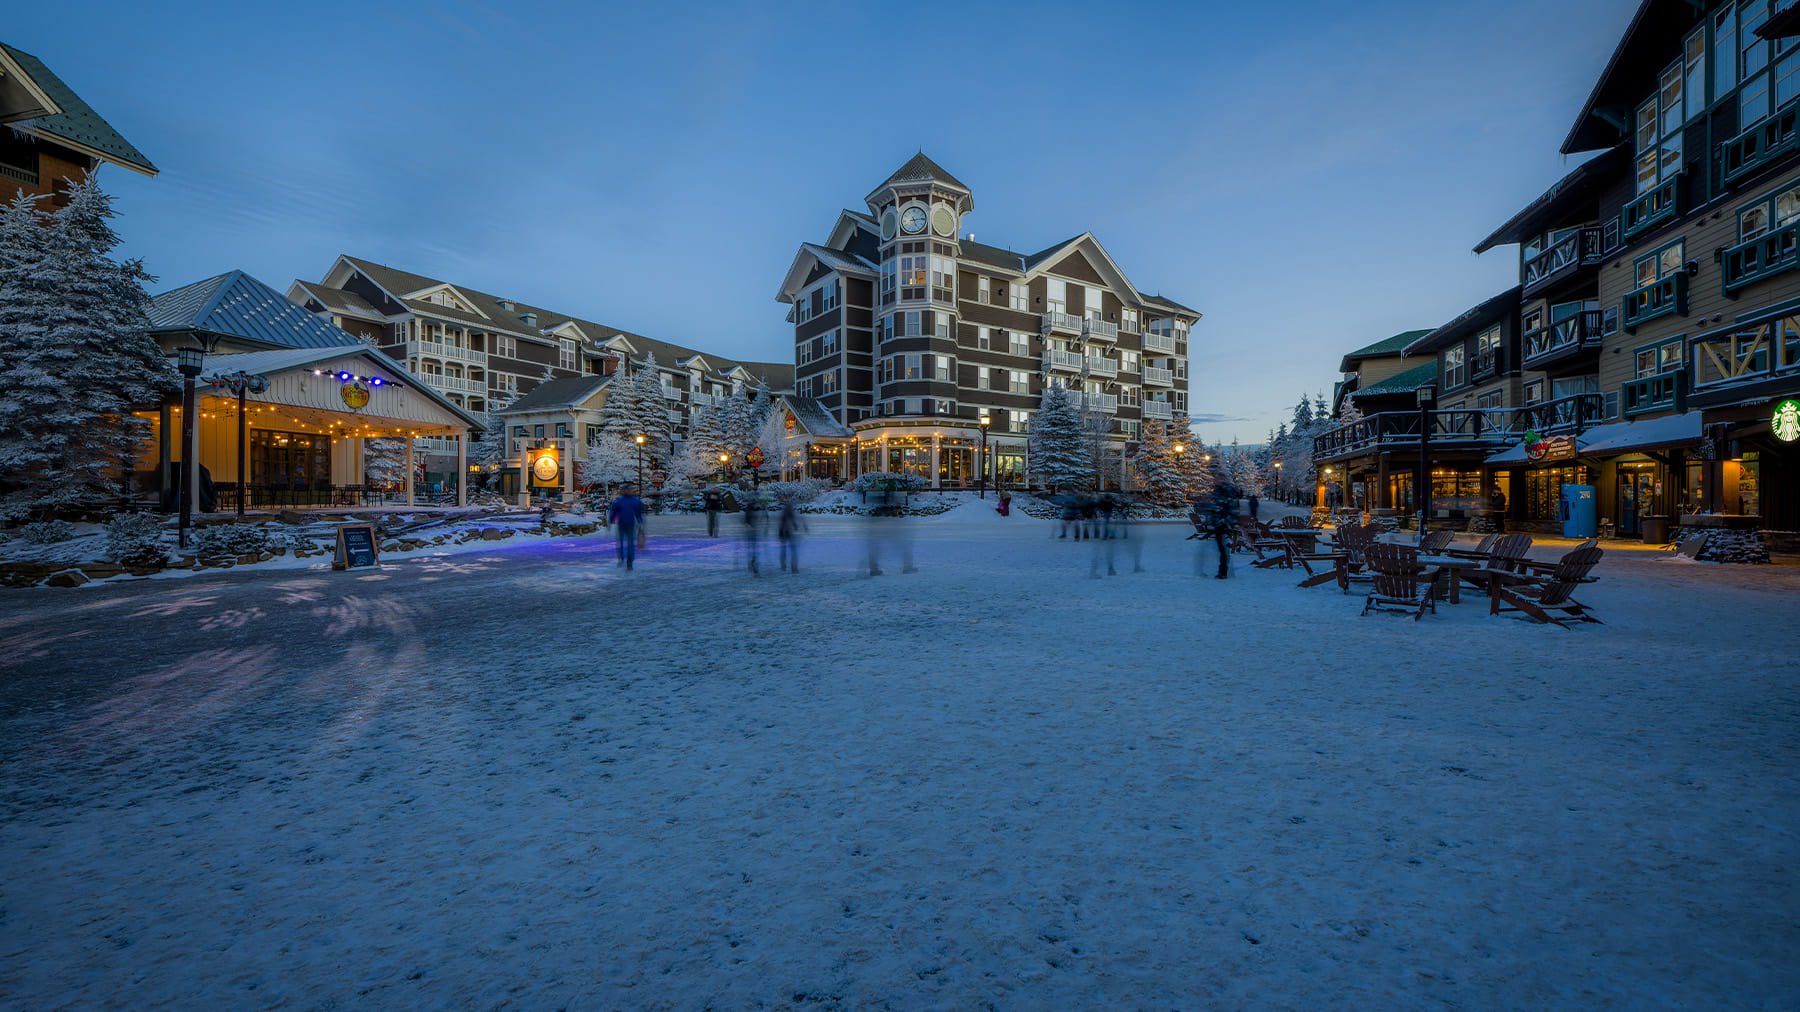 The BEST Snowshoe Mountain Hotels, Lodging, & Condo Rentals